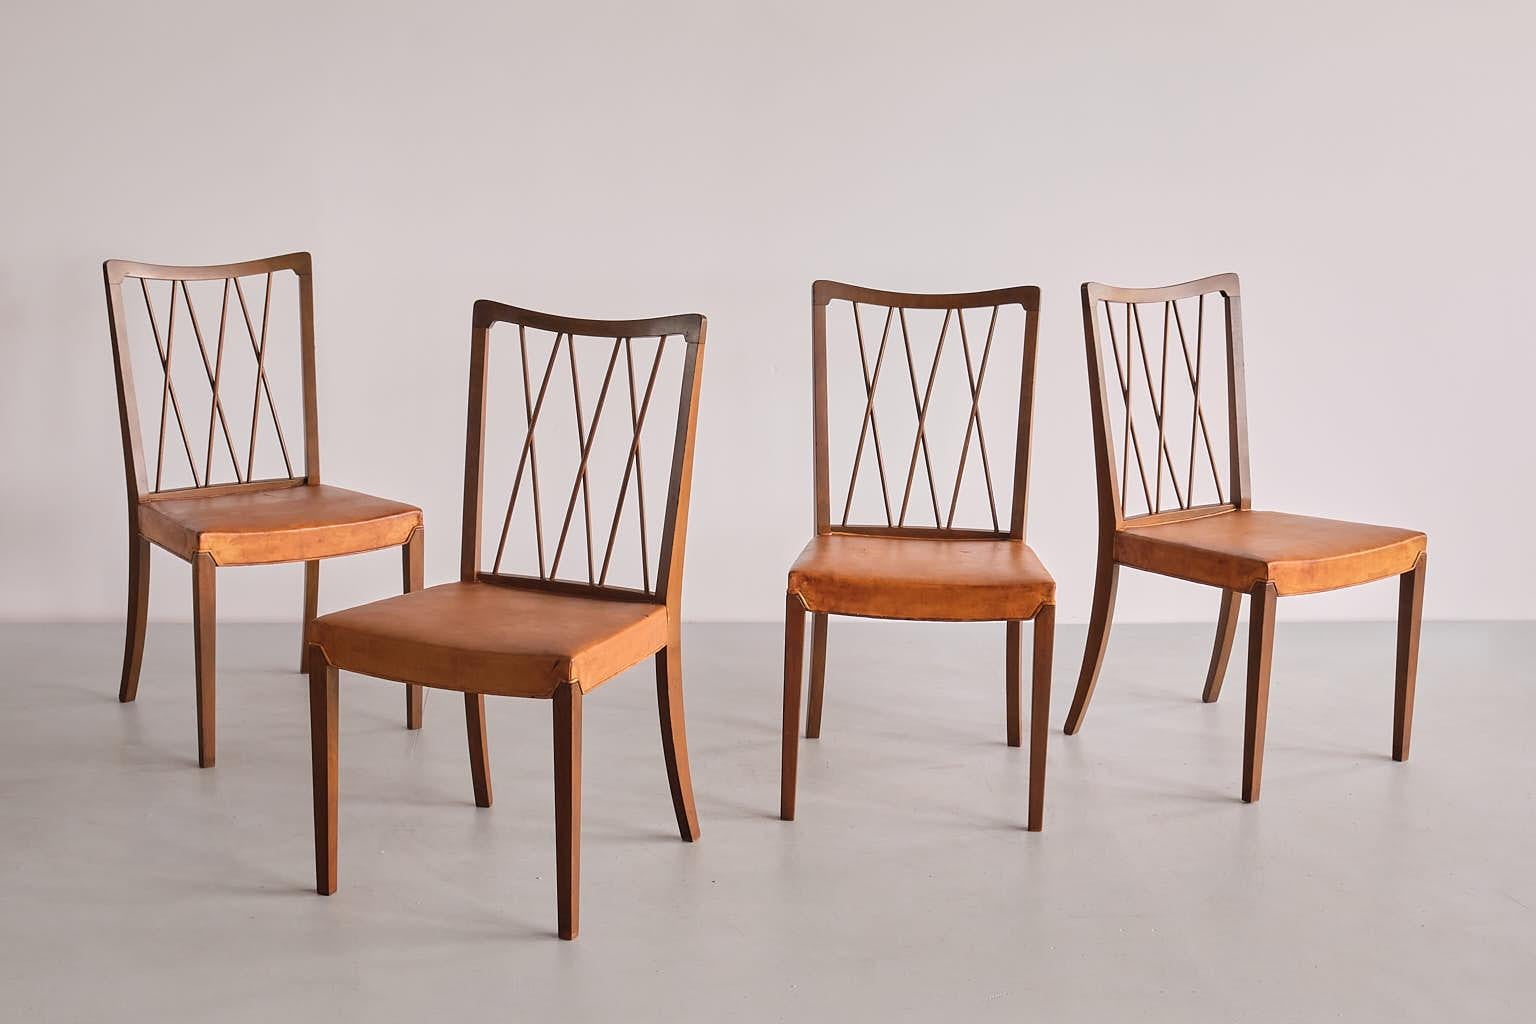 Danish Set of Eight Frode Holm Dining Chairs, Walnut and Leather, Illum, Denmark, 1940s For Sale